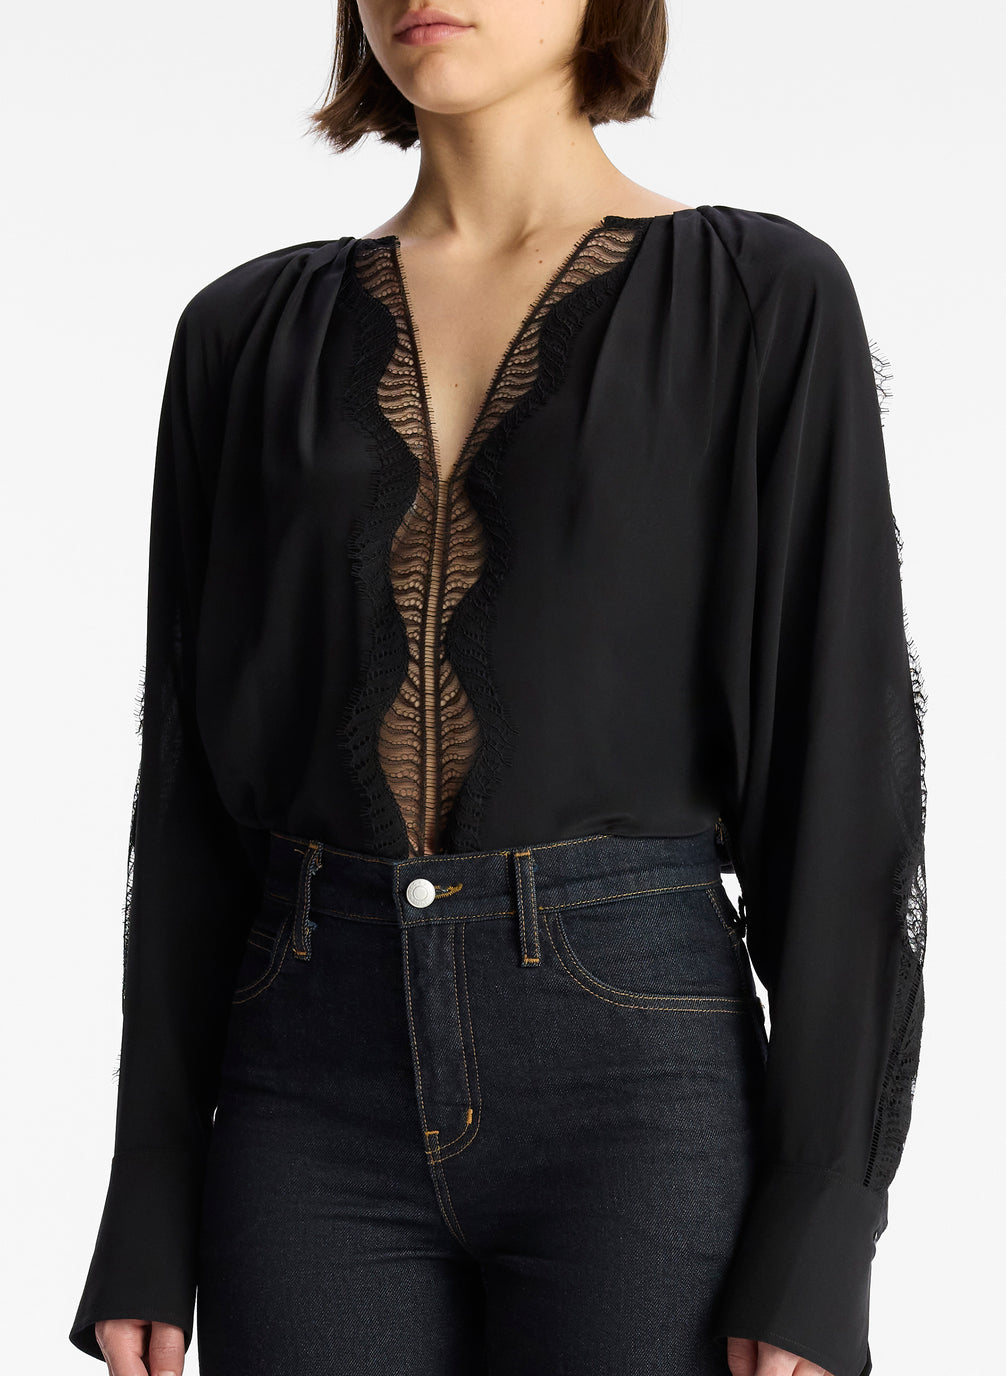 detail view of woman wearing black silk and lace long sleeve top and dark wash denim